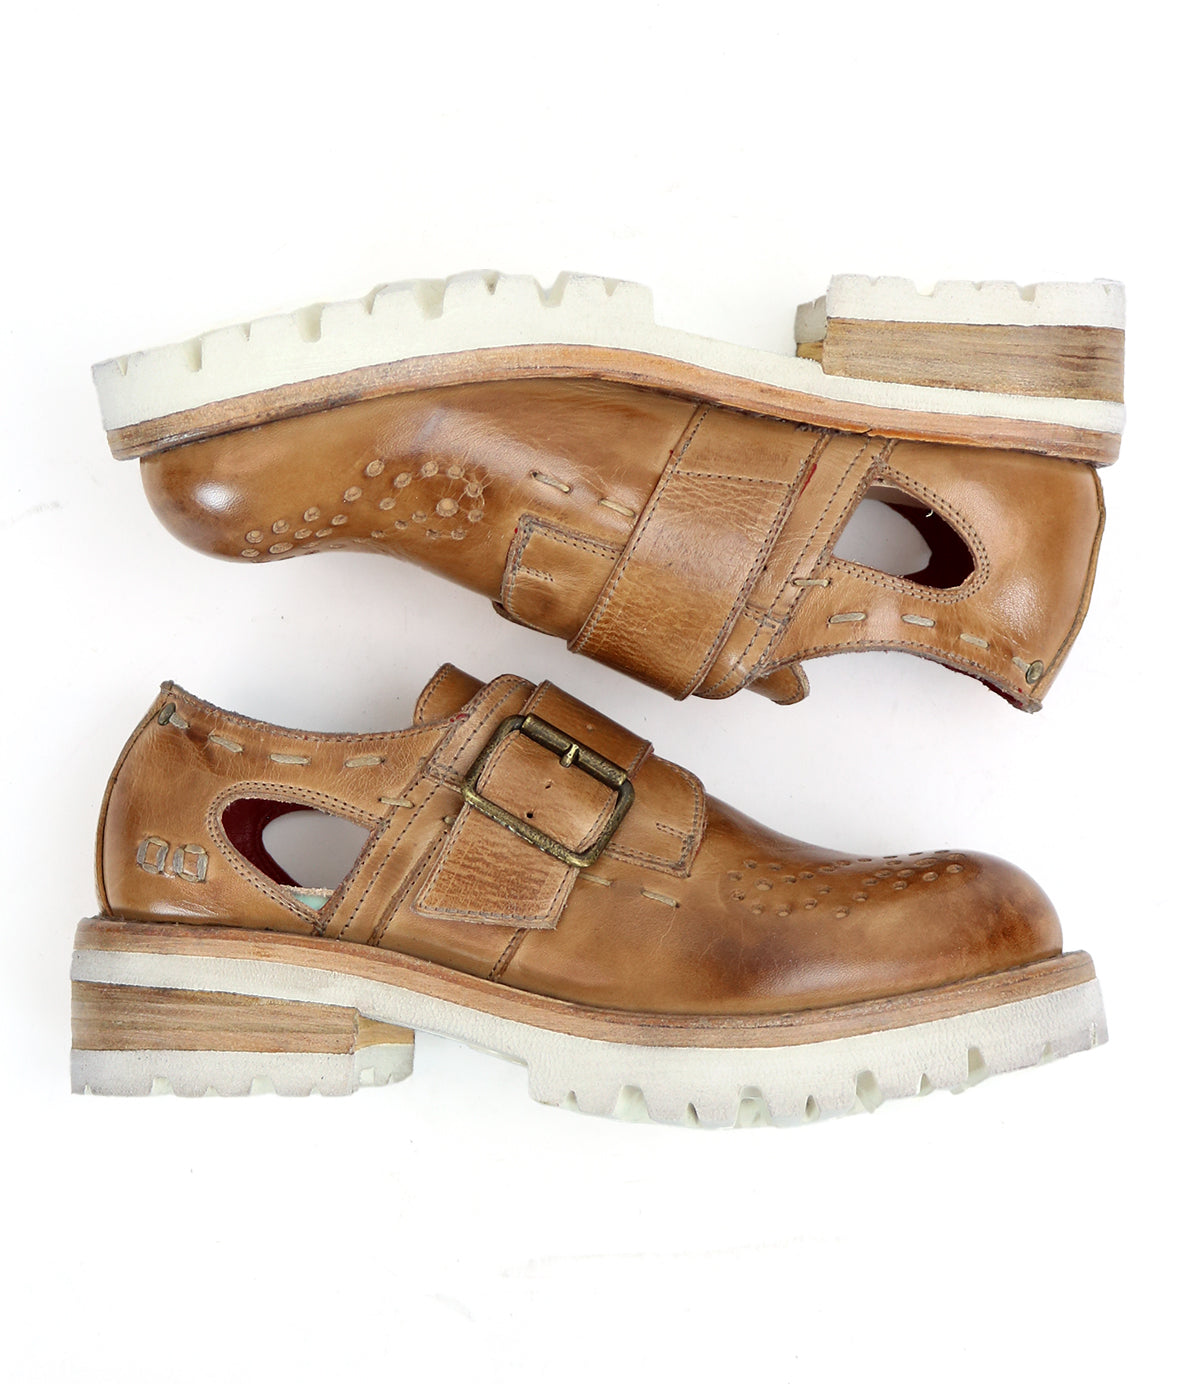 A pair of brown leather Dagny shoes by Bed Stu with perforated detailing and buckles.